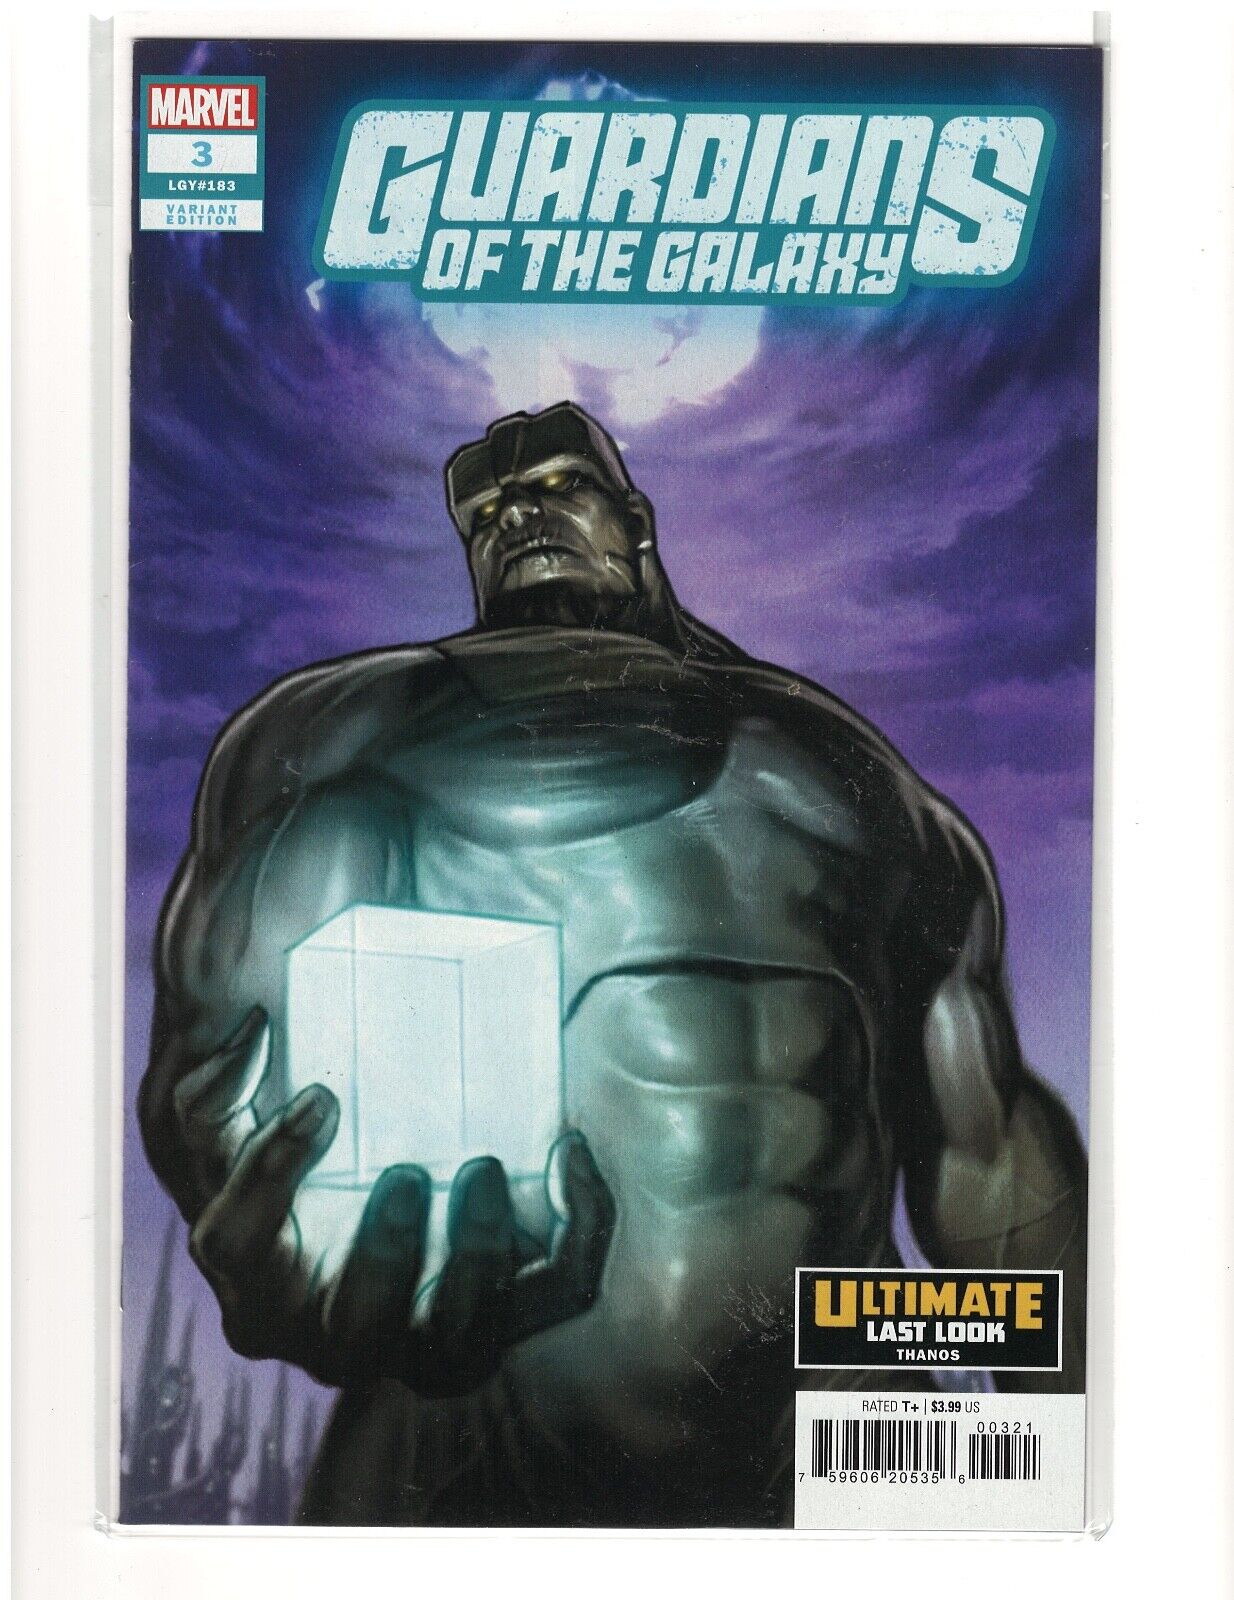 Guardians of the Galaxy (Volume 7) #3 Ultimate last look Thanos variant 9.6